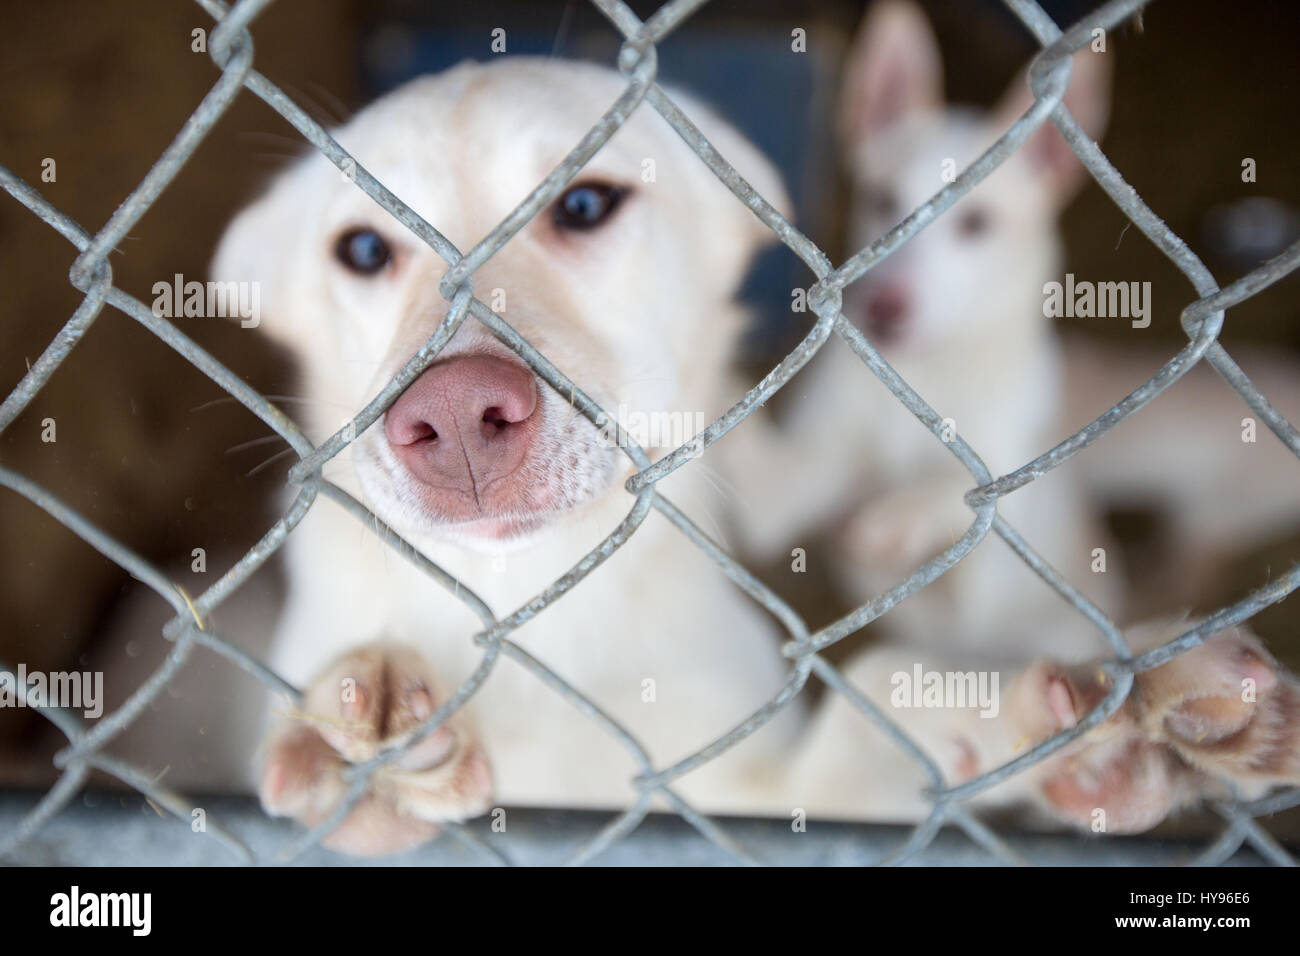 Cute white dog behind fence with paws on fence and pink nose, looking directly at camera with blue eyes; sad sweet pup Stock Photo